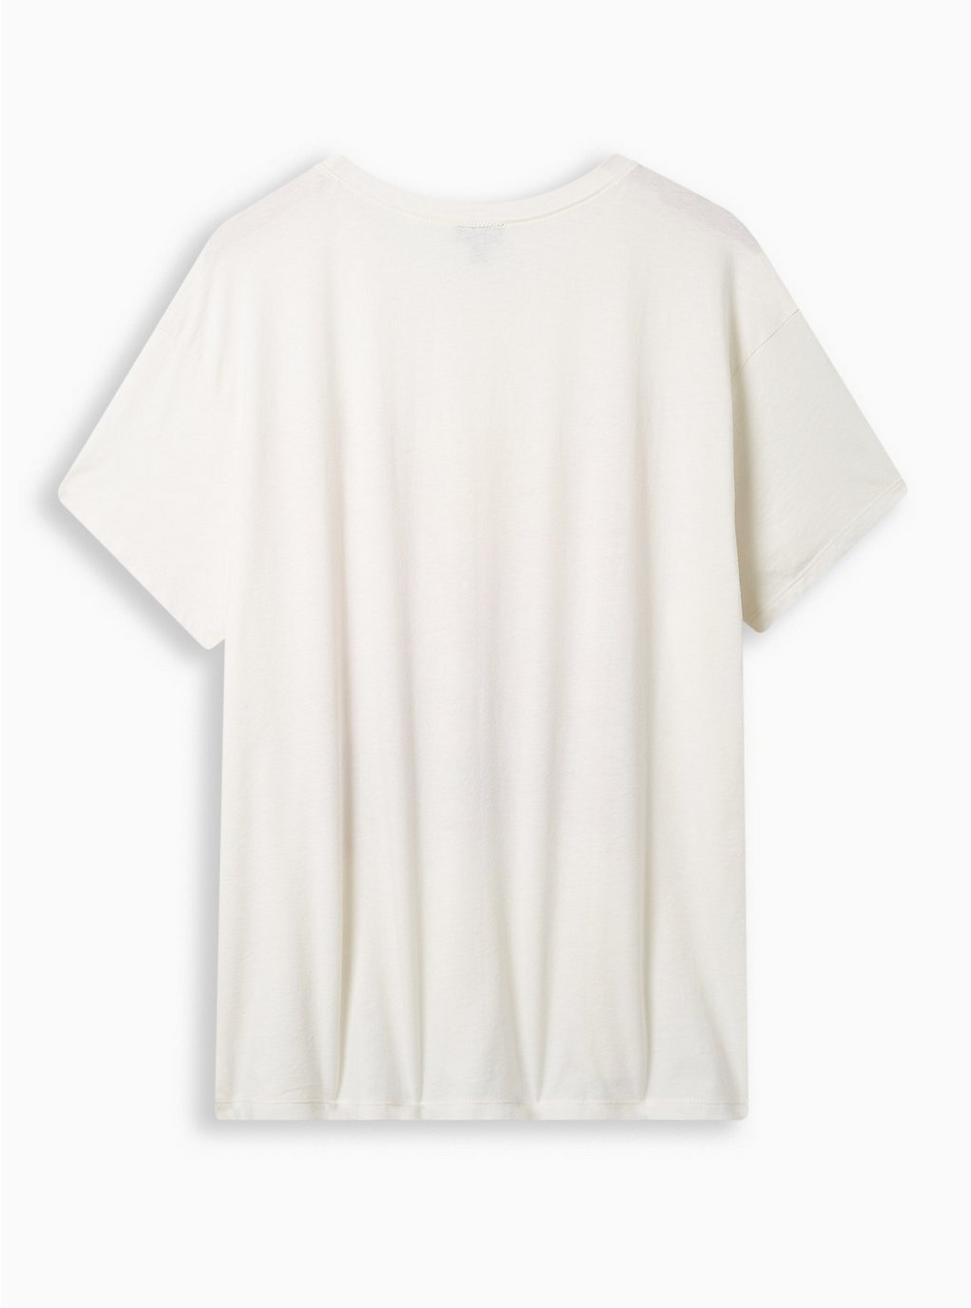 Plus Size Zion Classic Fit Polyester Cotton Jersey Crew Tee, IVORY, alternate